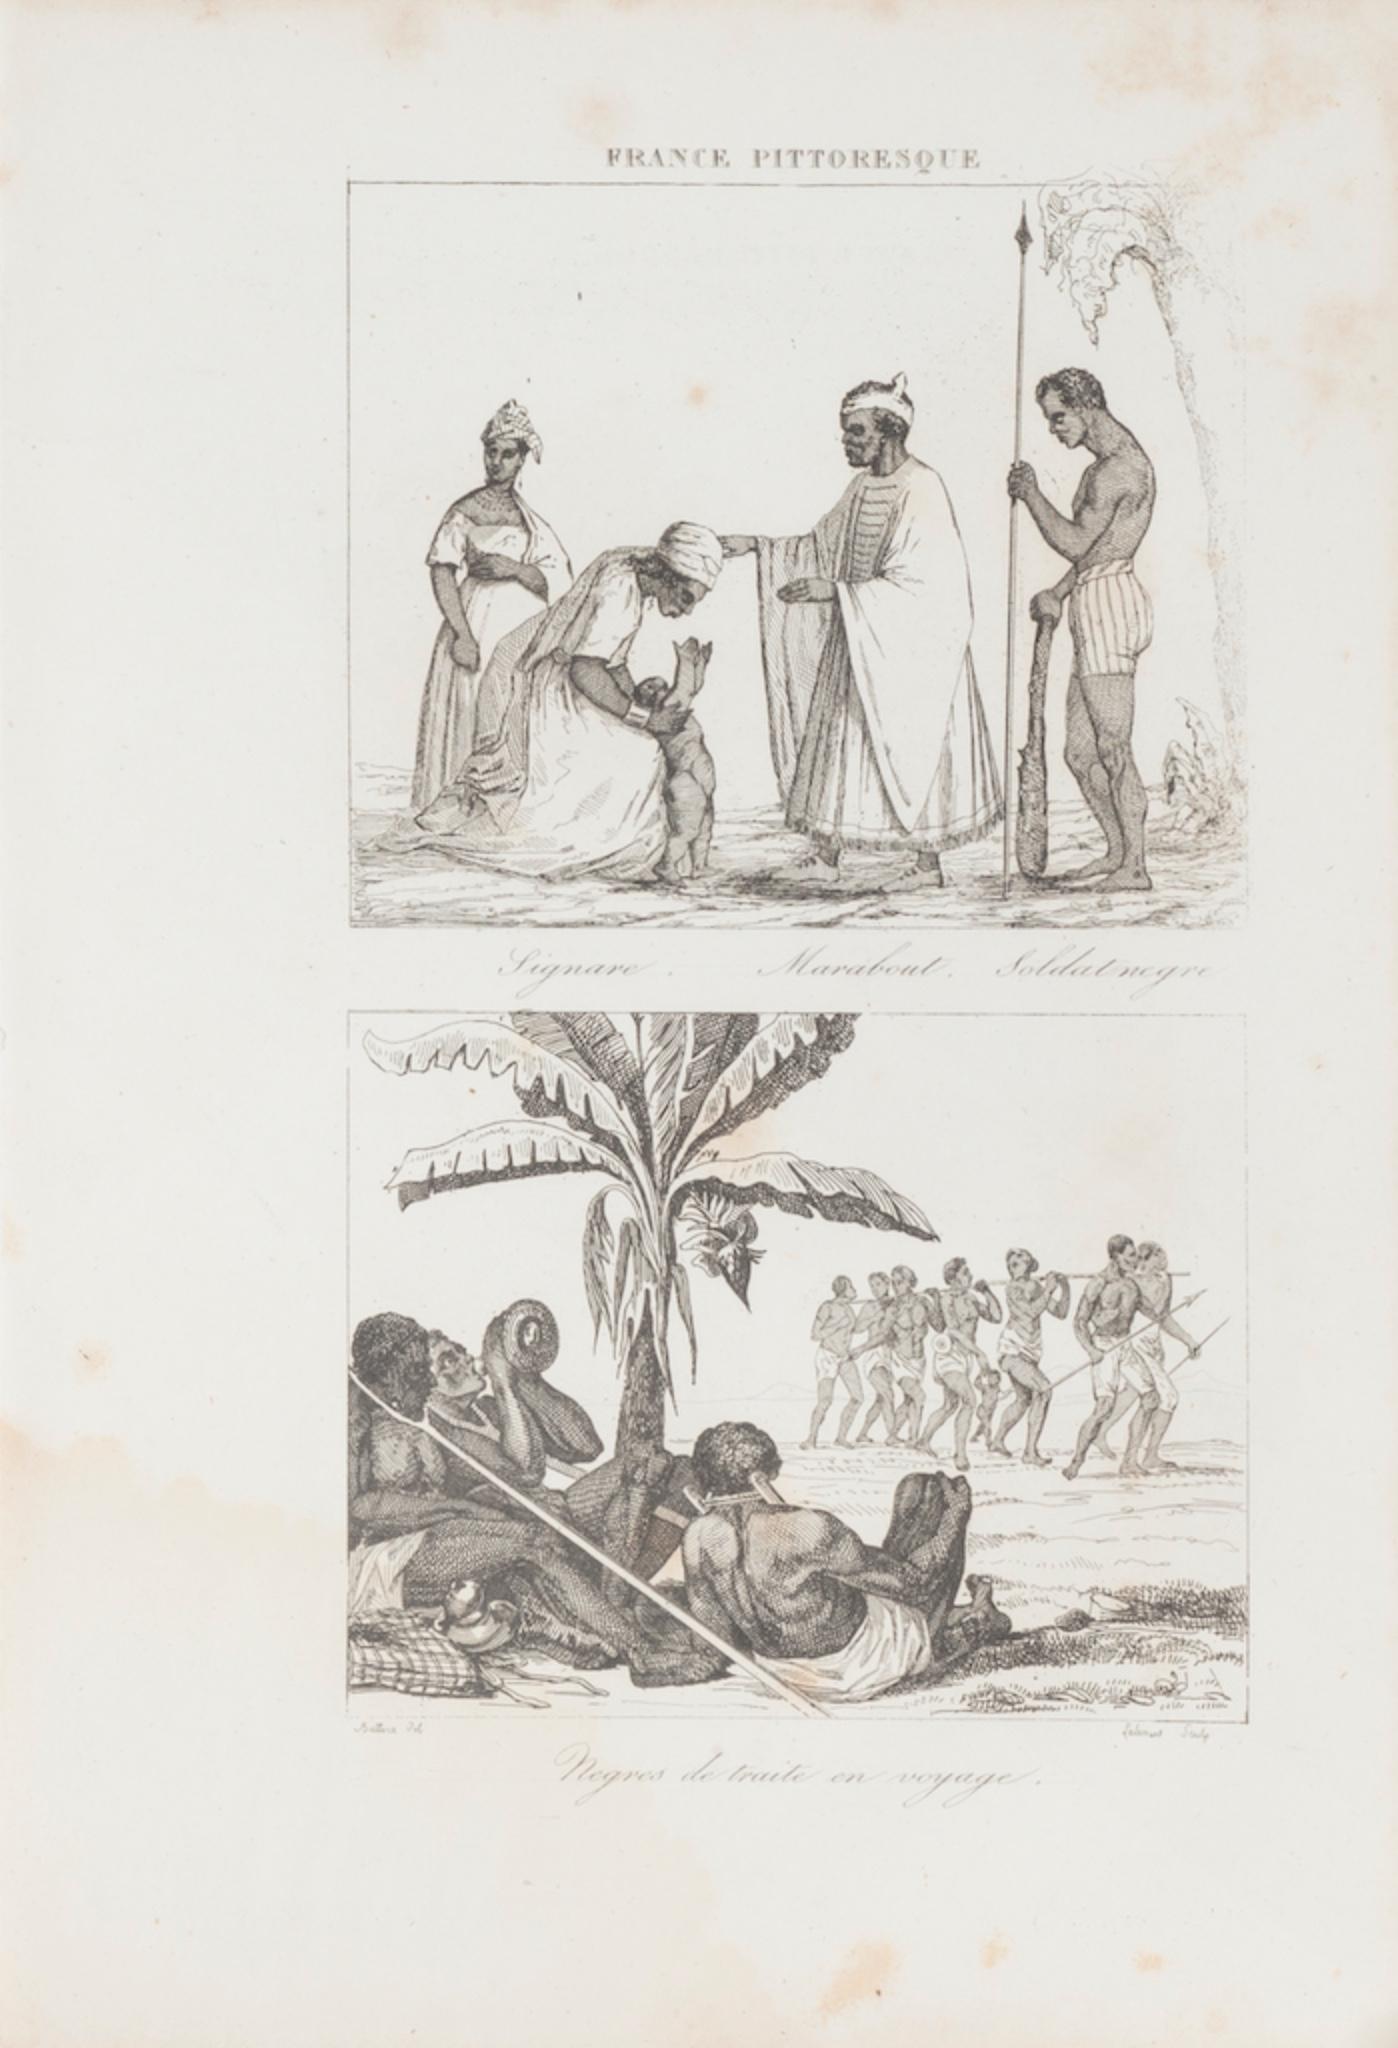 Unknown Figurative Print - Indigenous Costumes  - Original Lithograph - 19th Century